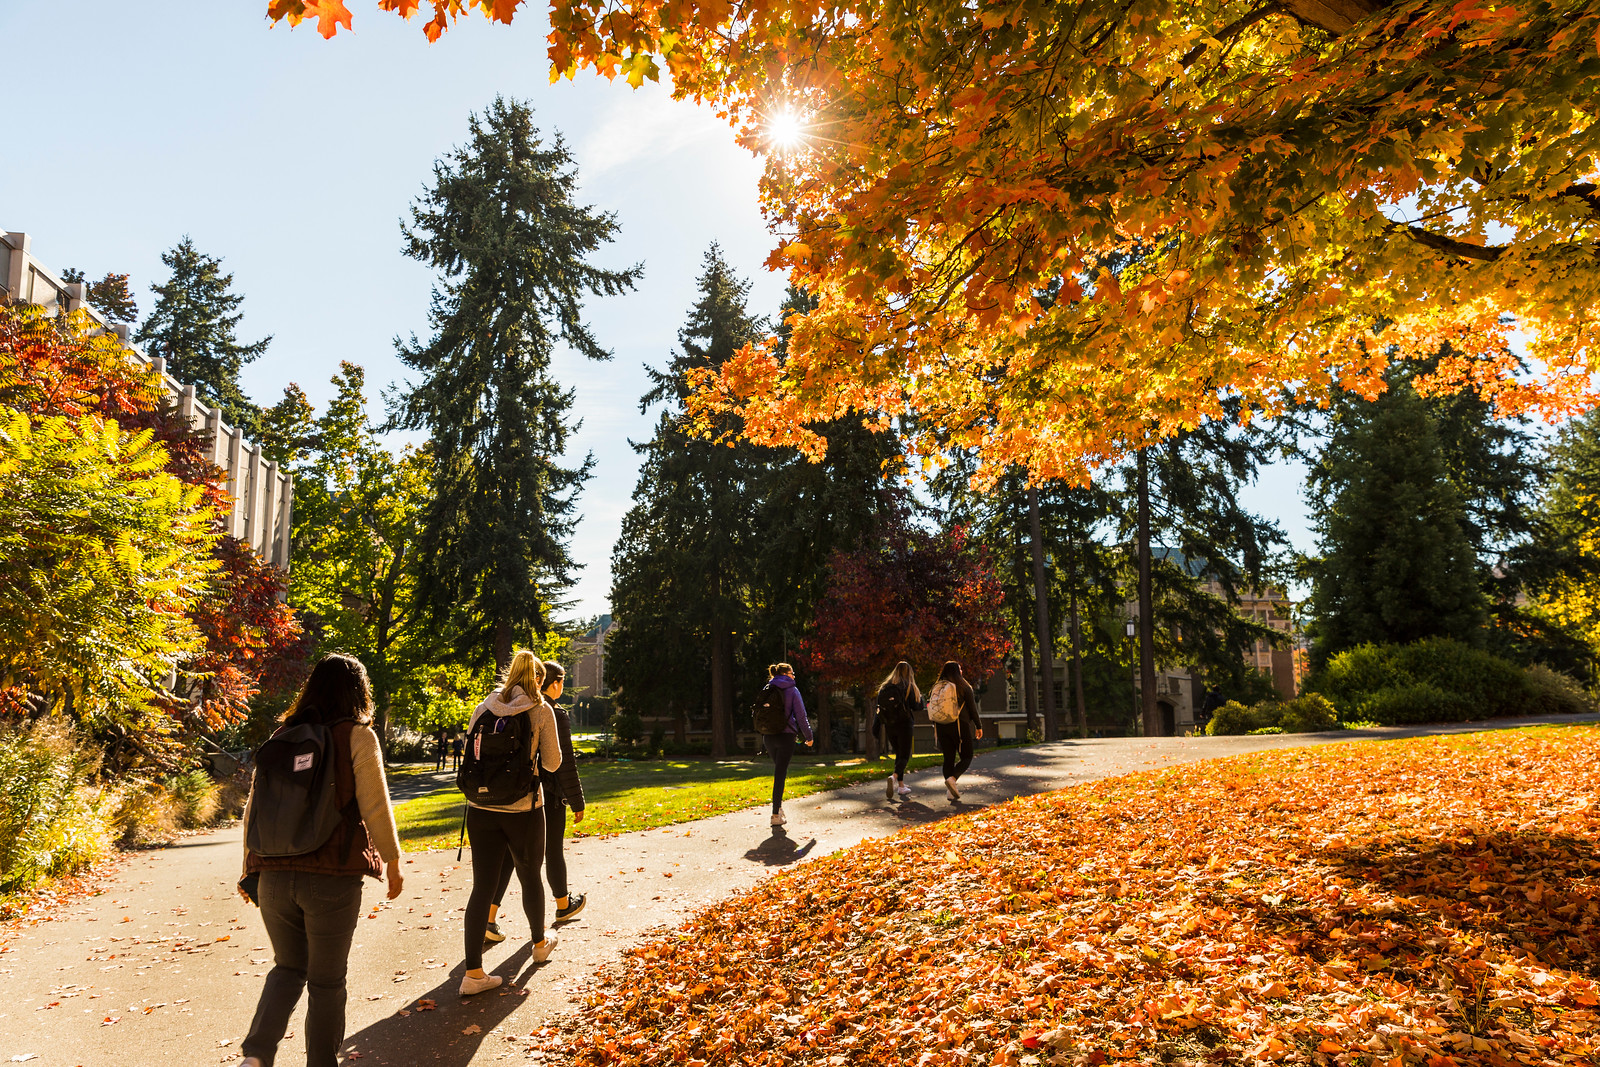 Students walking across campus in autumn